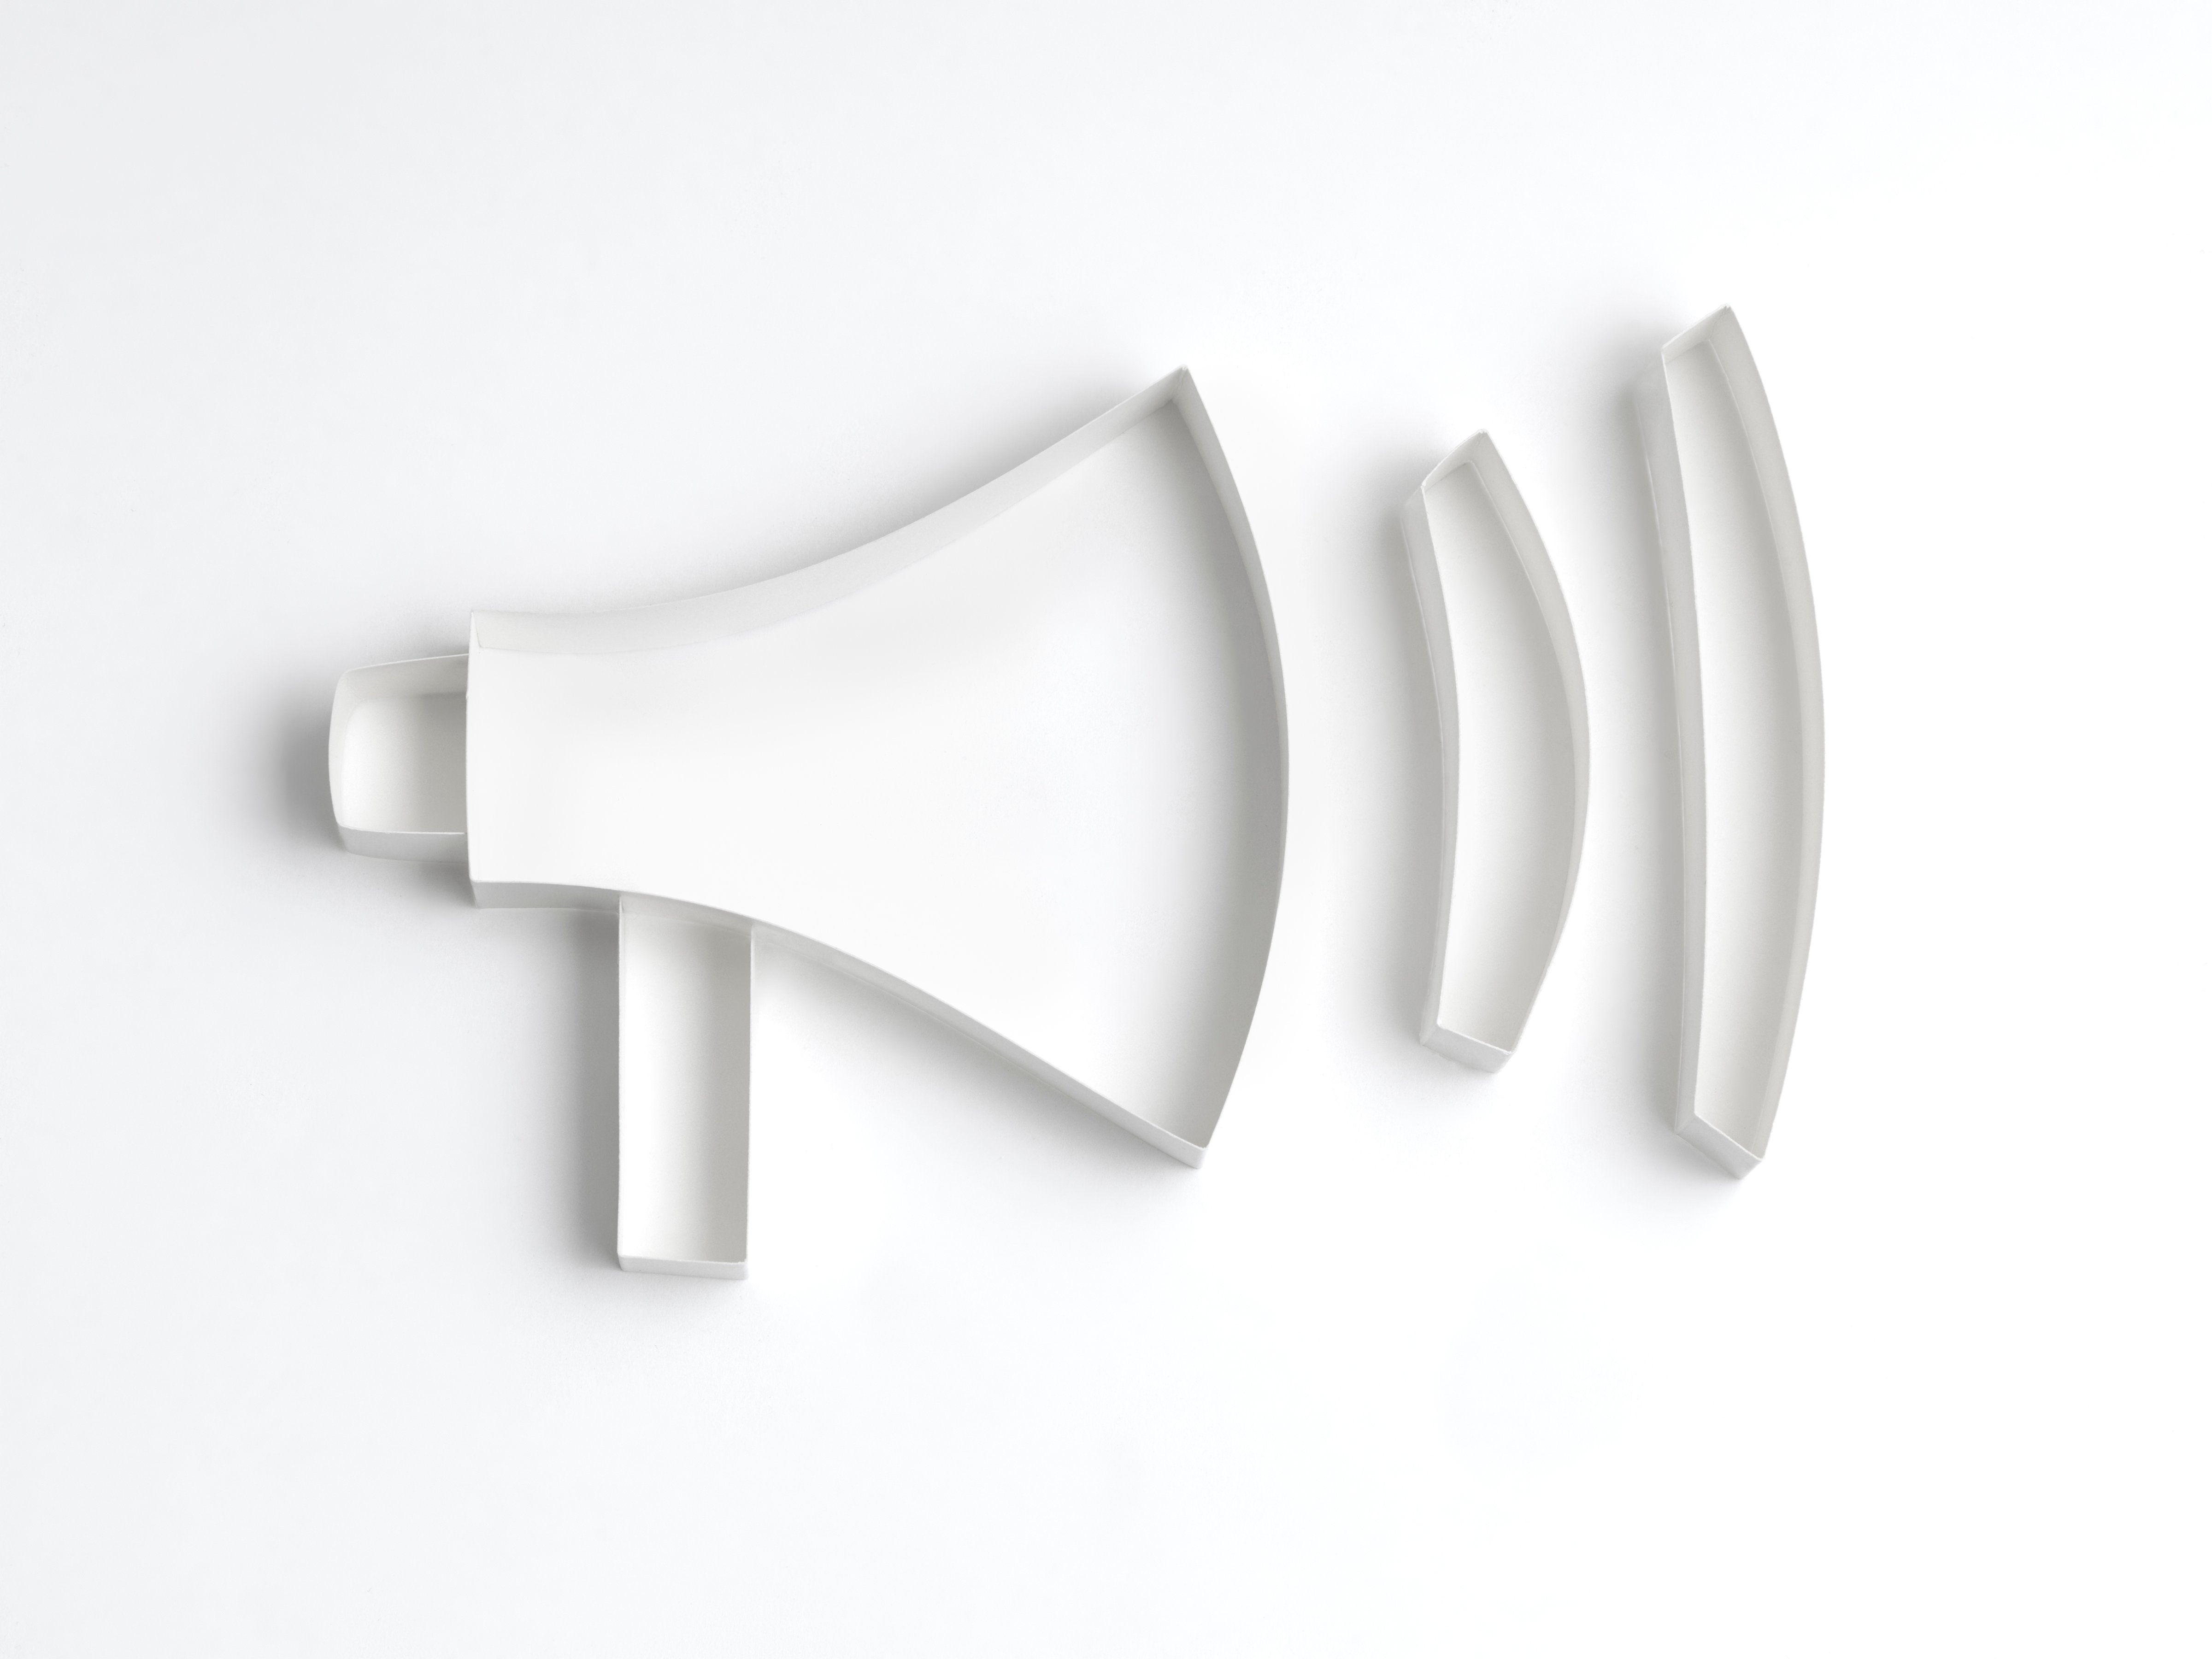 Origami megaphone (Getty Images)